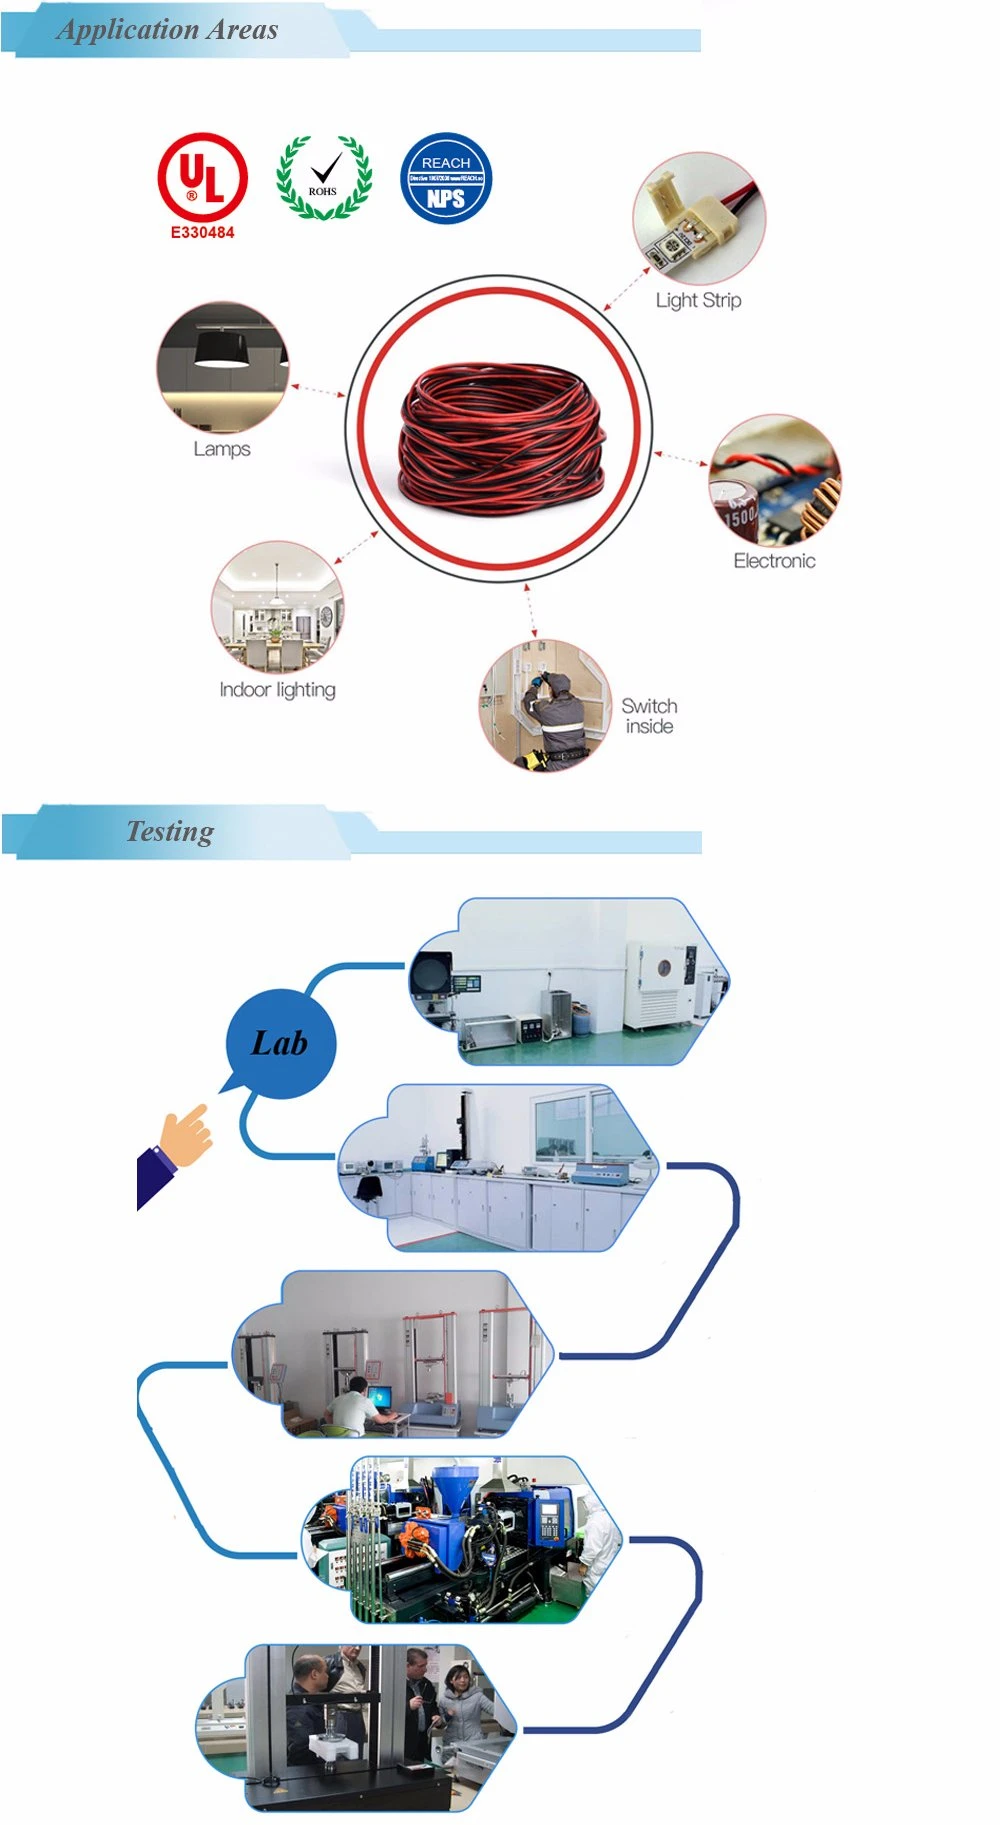 High Temperature Wire, FEP Insulated Wire Style UL1330 Hook-up Wire